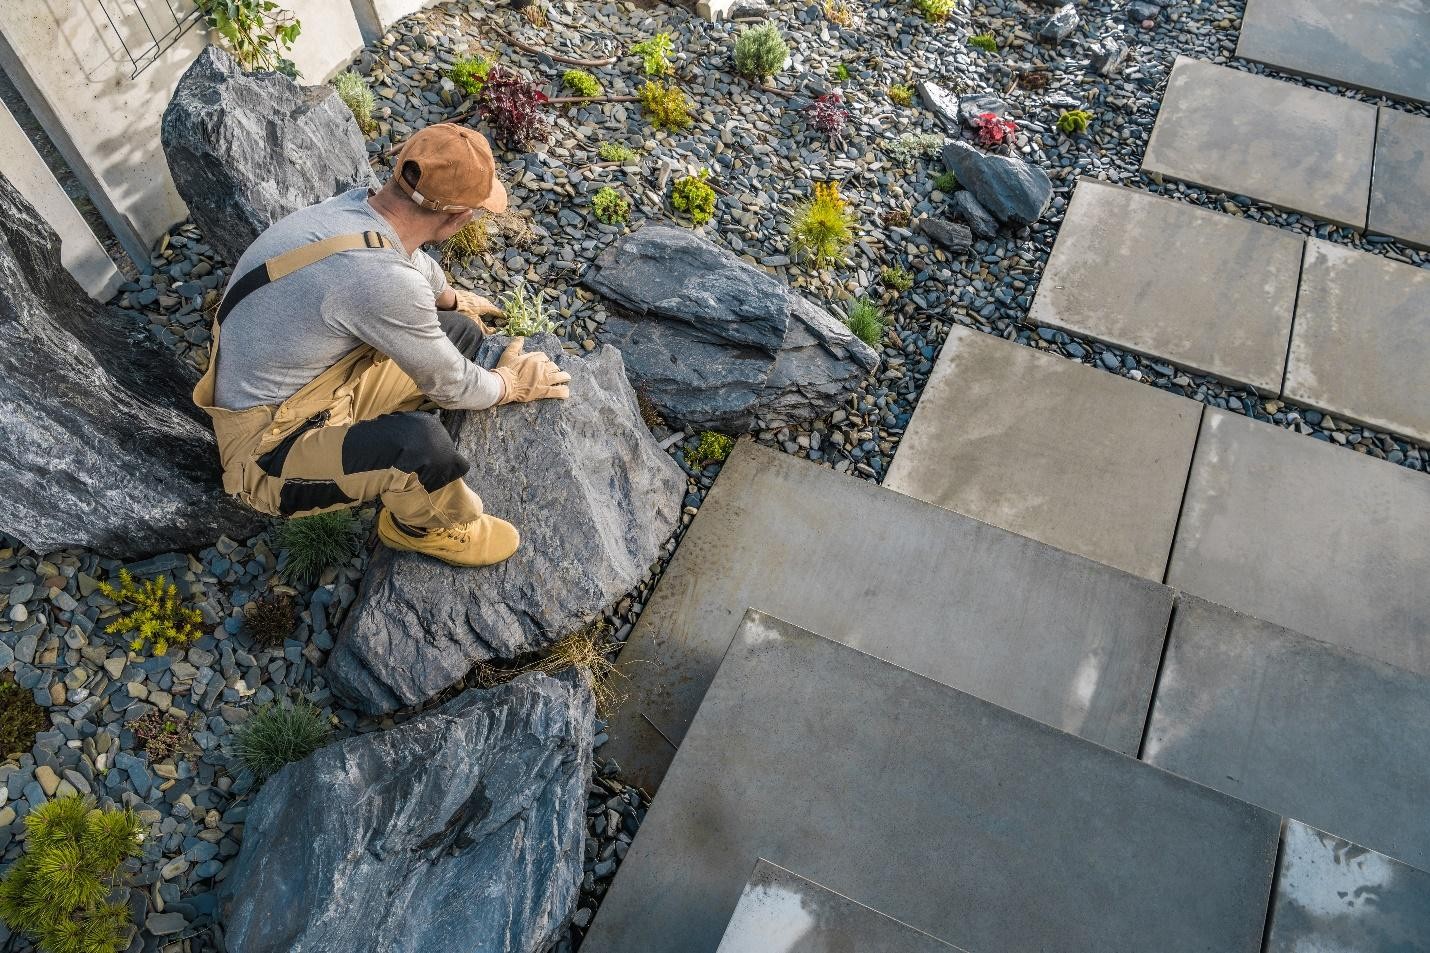 Skilled landscape designer arranging gravel in a modern backyard for a contemporary outdoor space.